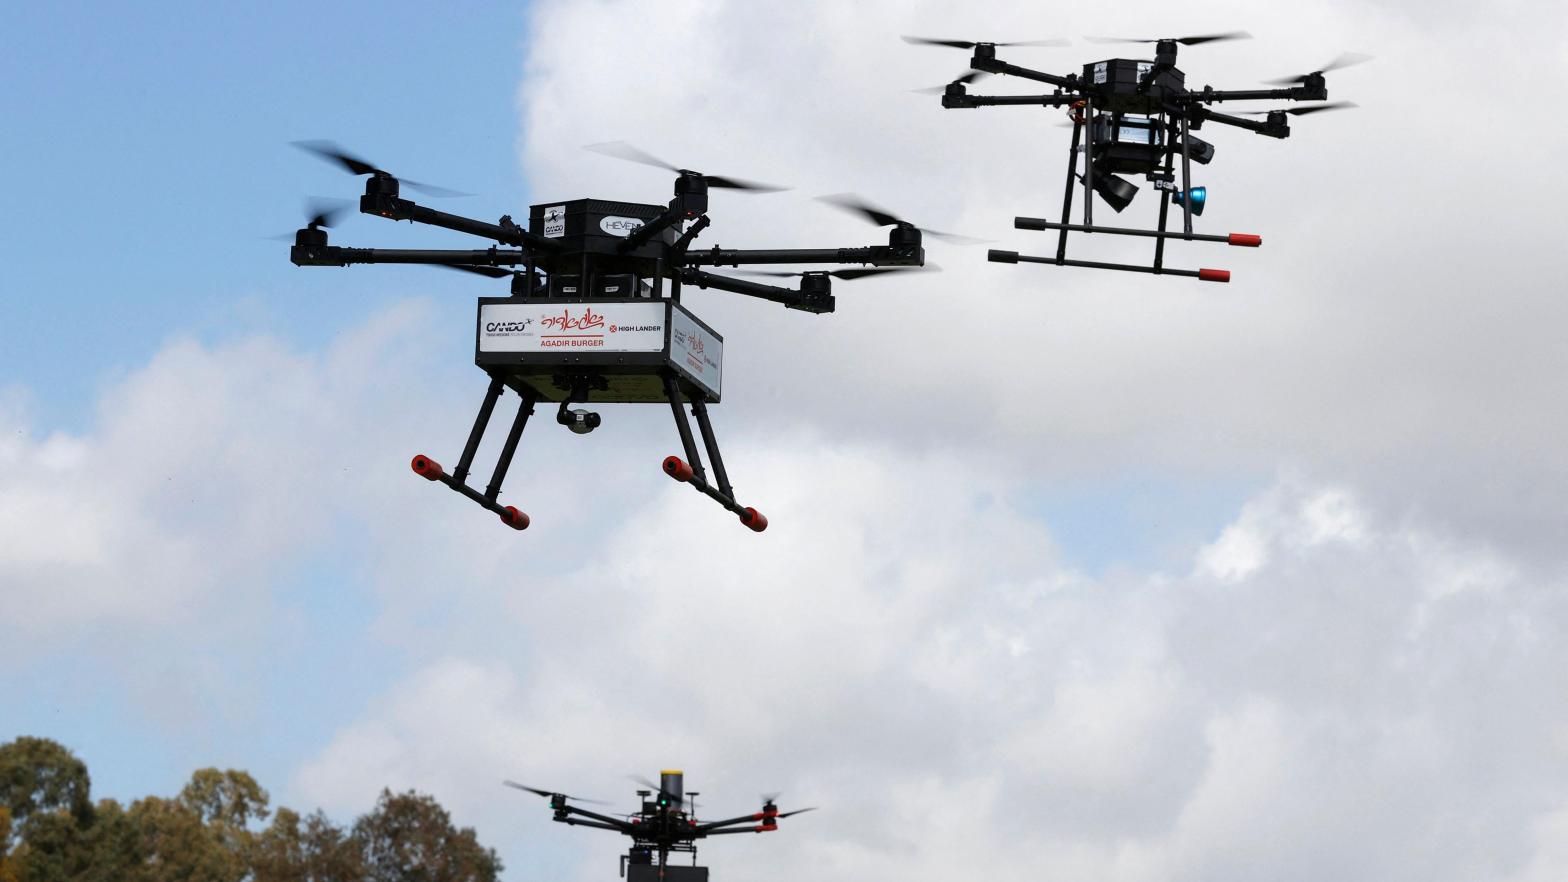 Delivery drones carry fast food orders through the sky in the Israeli coastal city of Hadera. March 17, 2021.  (Photo: JACK GUEZ / AFP, Getty Images)